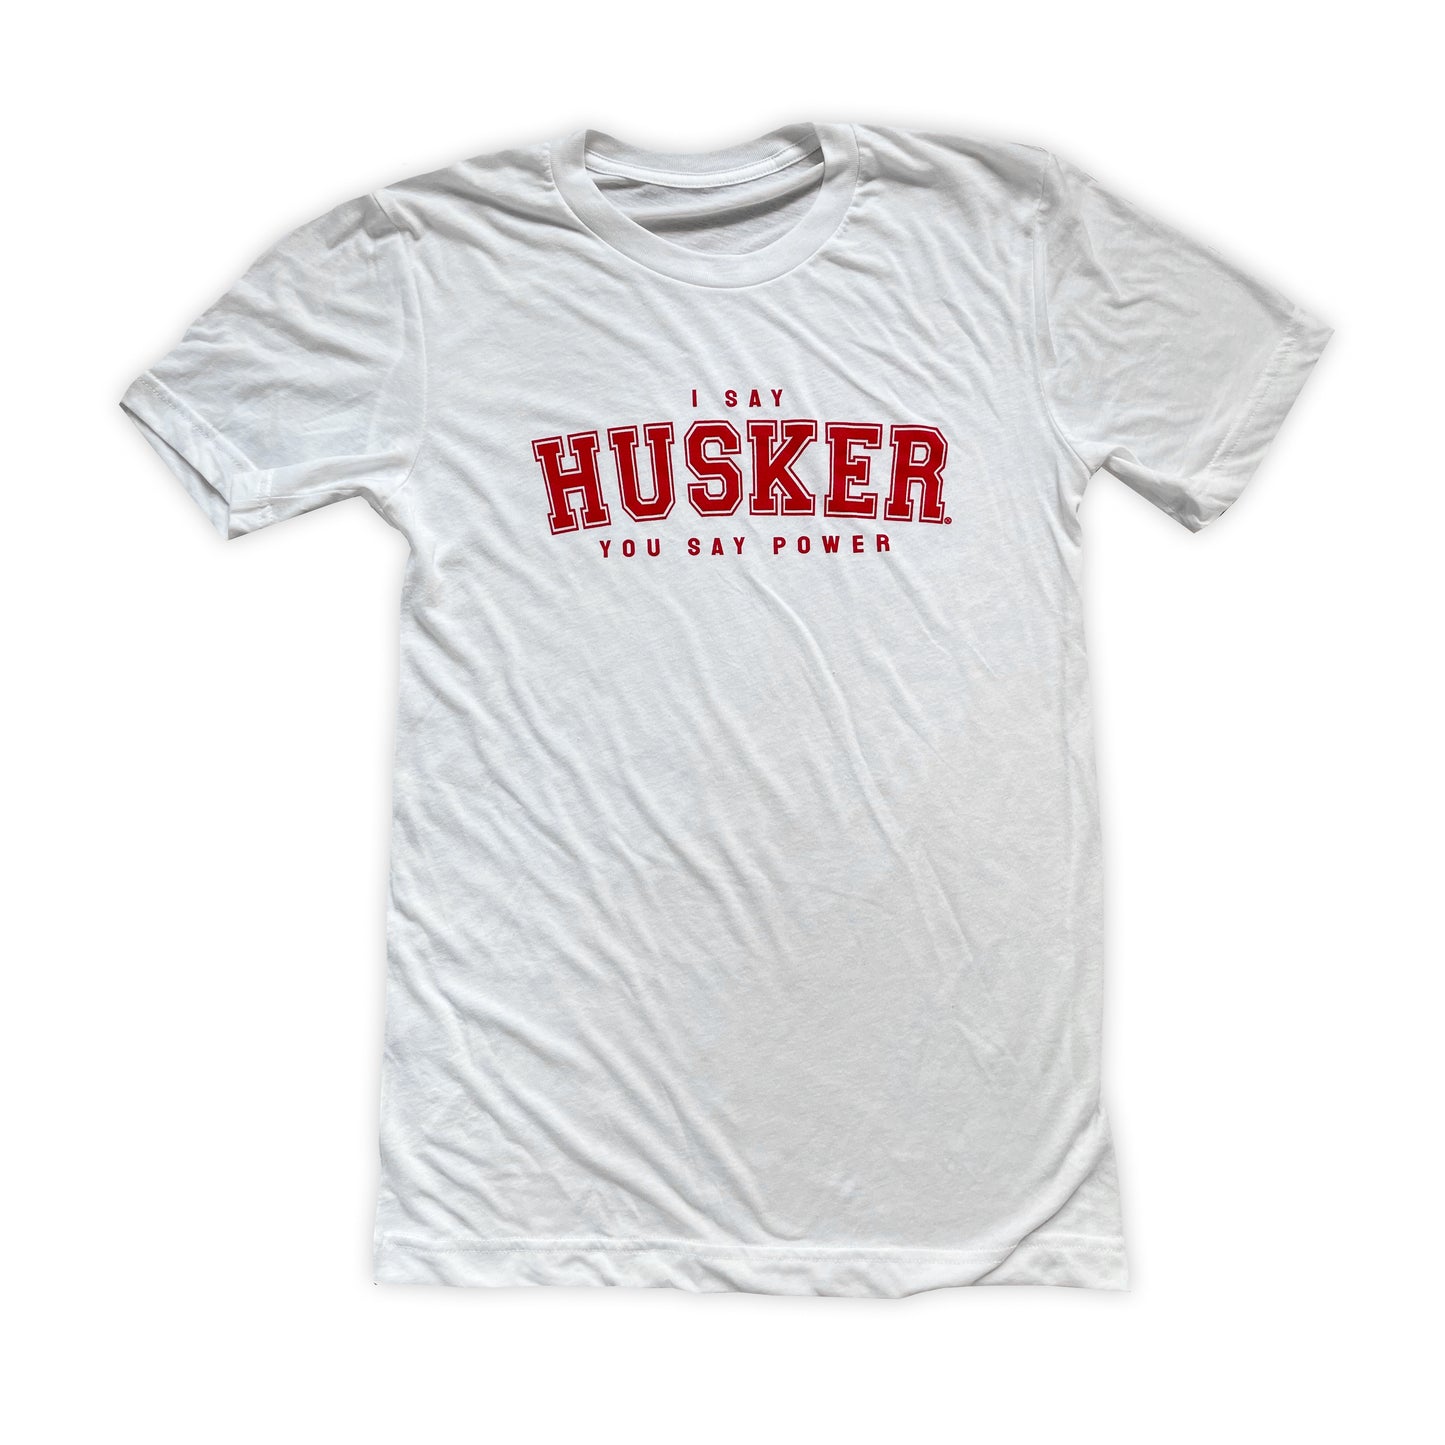 ON SALE - When I Say Husker tee